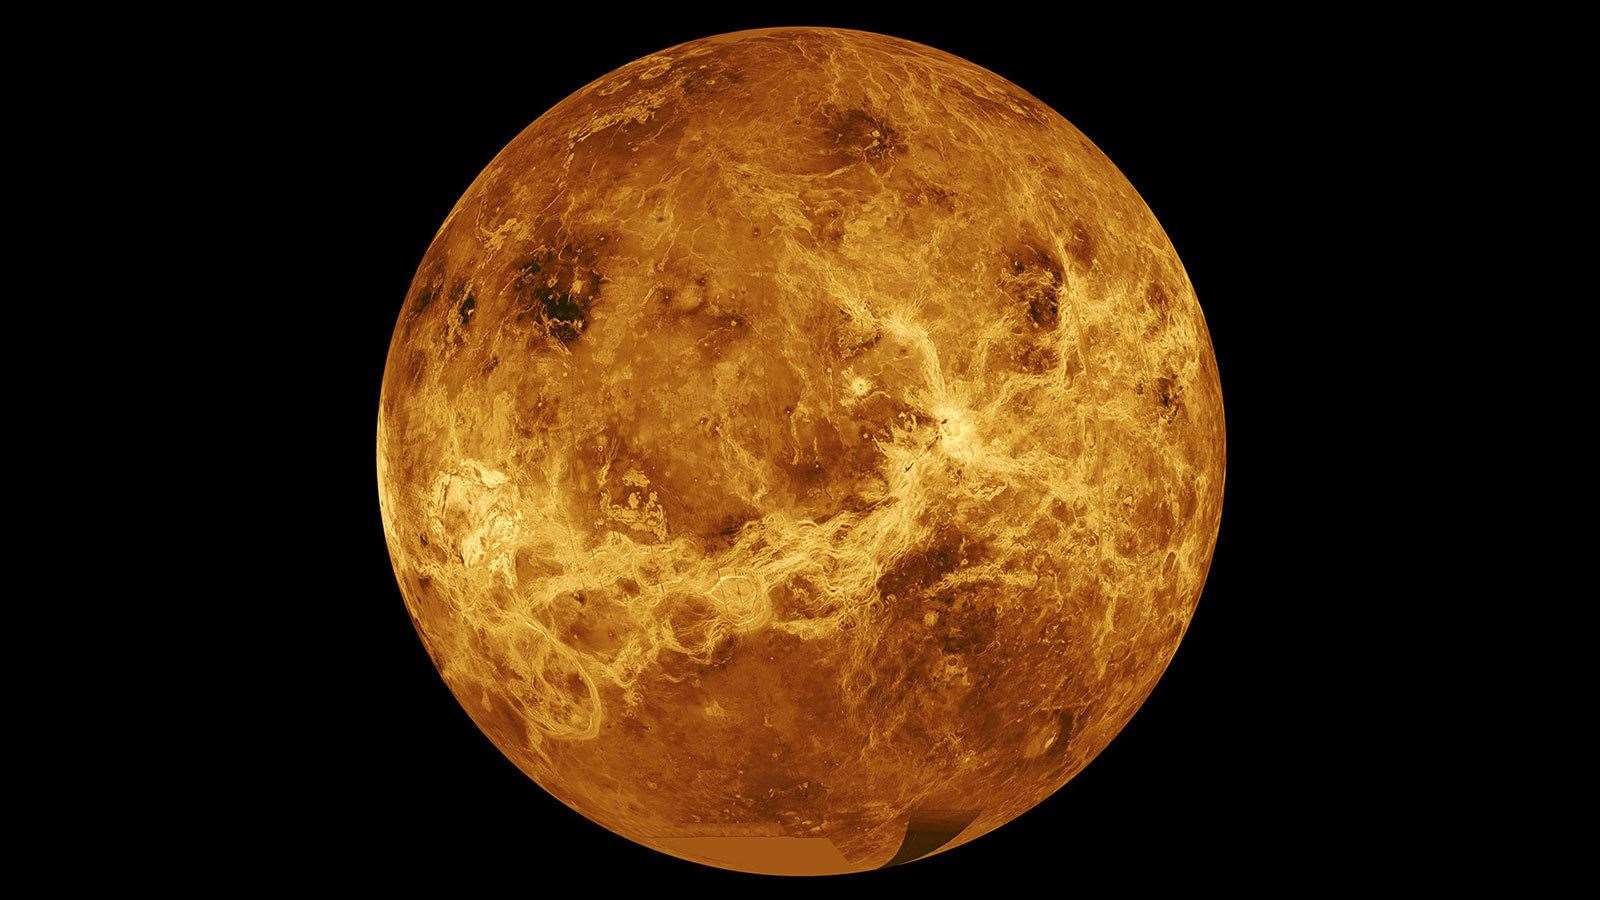 Venus is the most reflective planet in the solar system Picture: NASA Jet Propultion Laboratory